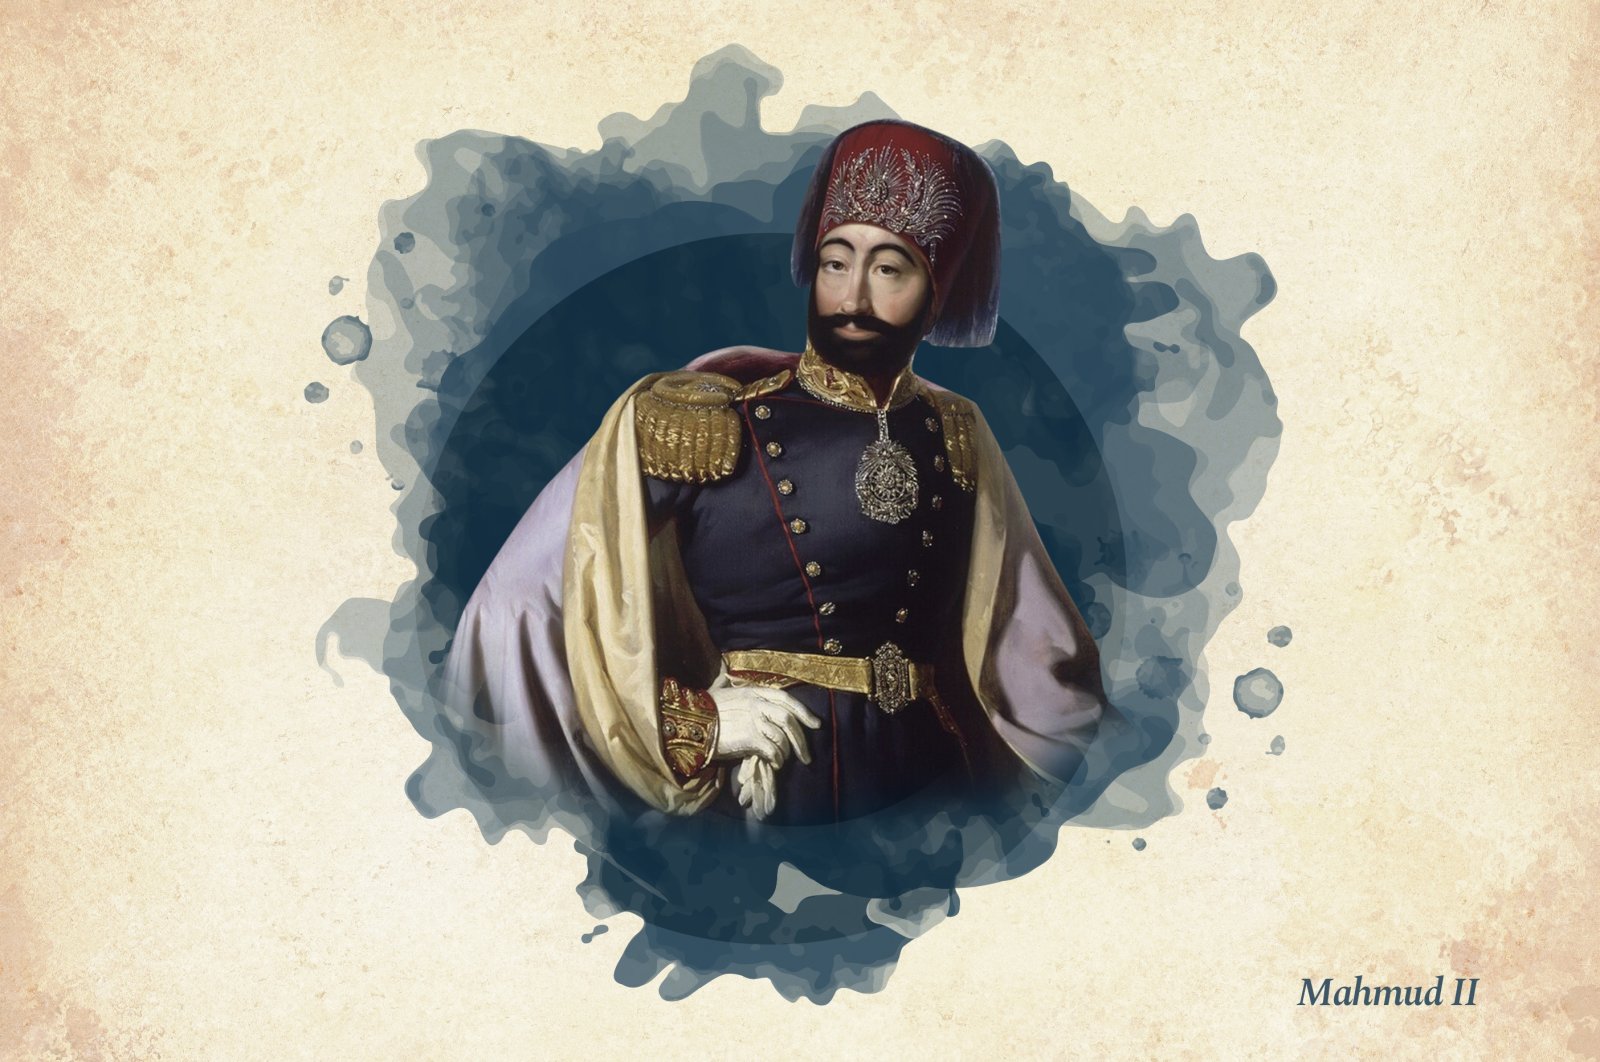 This widely used illustration shows Sultan Mahmud II, the 30th ruler of the Ottoman Empire. (Wikimedia/ Edited by Büşra Öztürk)